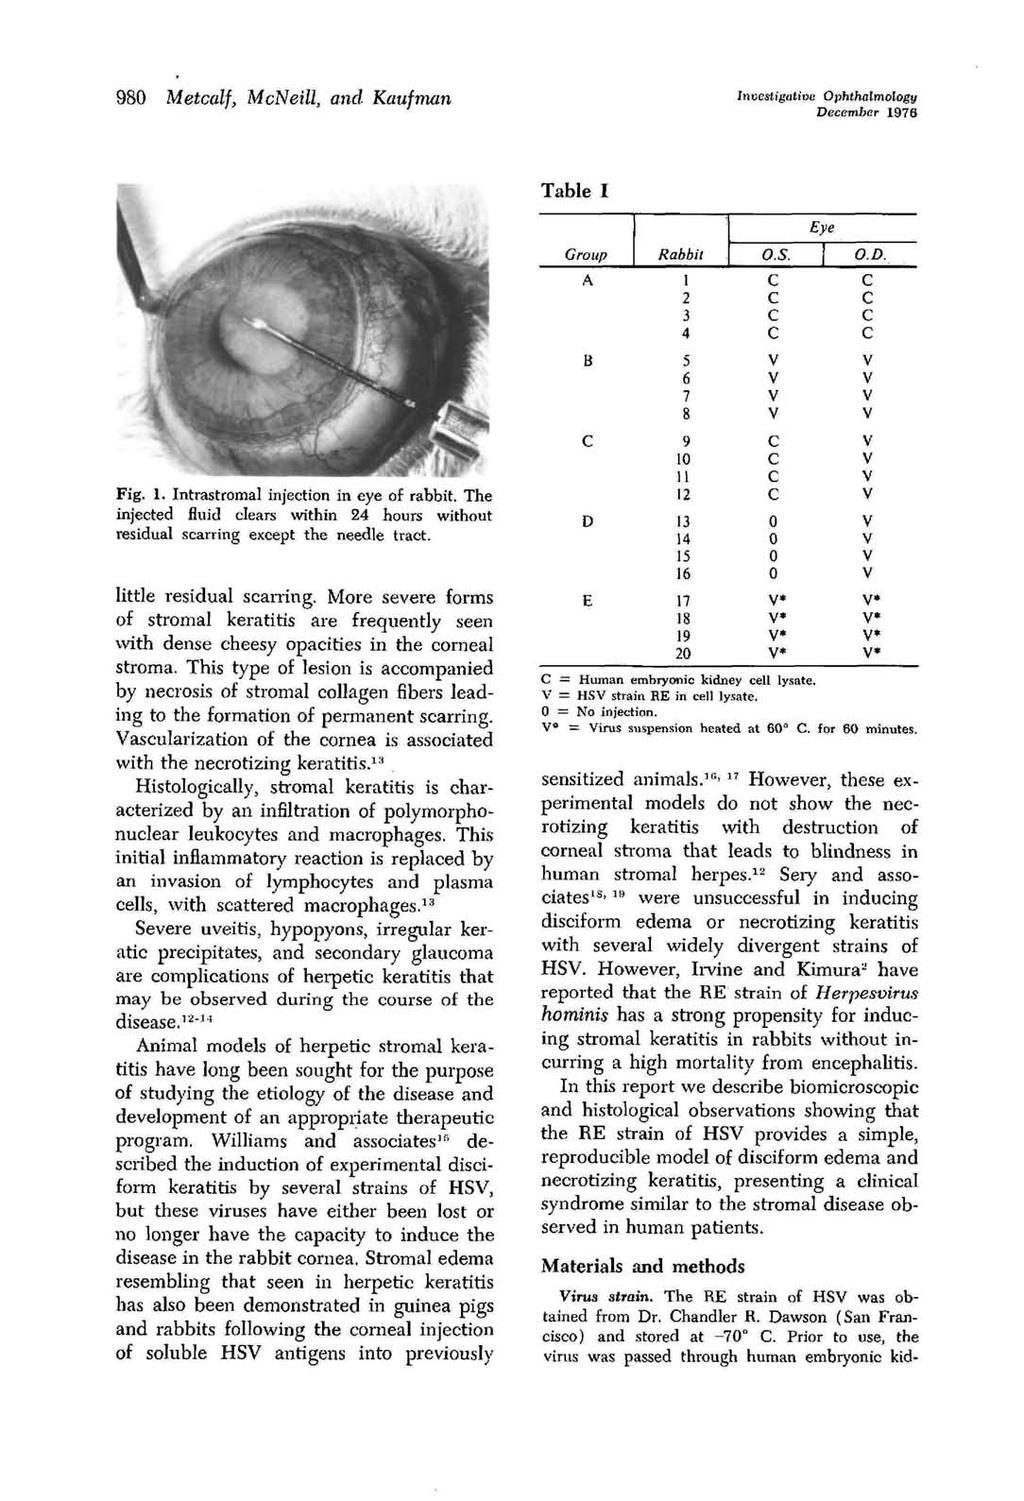 98 Metalf, MNeill, and Kaufman Investigative Ophthalmology Deember 1976 Table I Fig. 1. Intrastromal injetion in eye of rabbit.